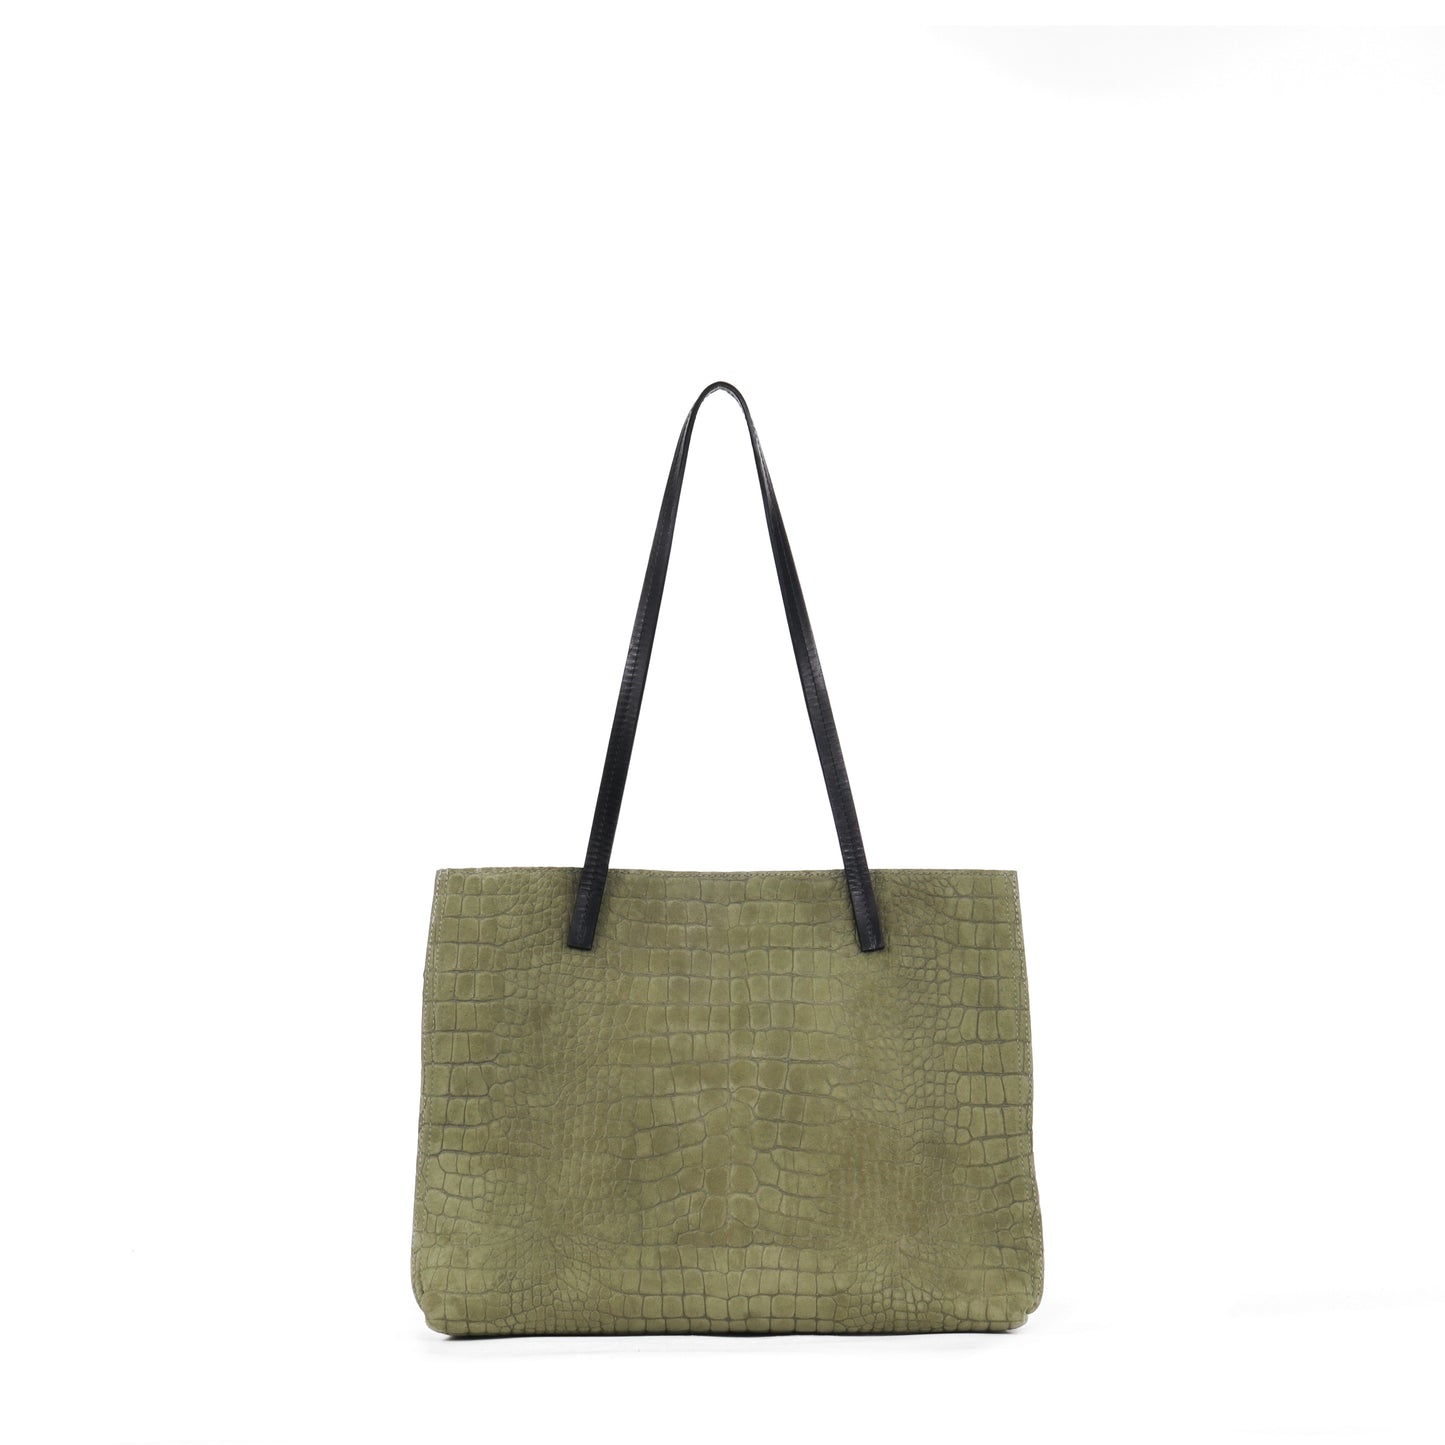 STRAPPY DAY BAG FIG SUEDED EMBOSSED CROC